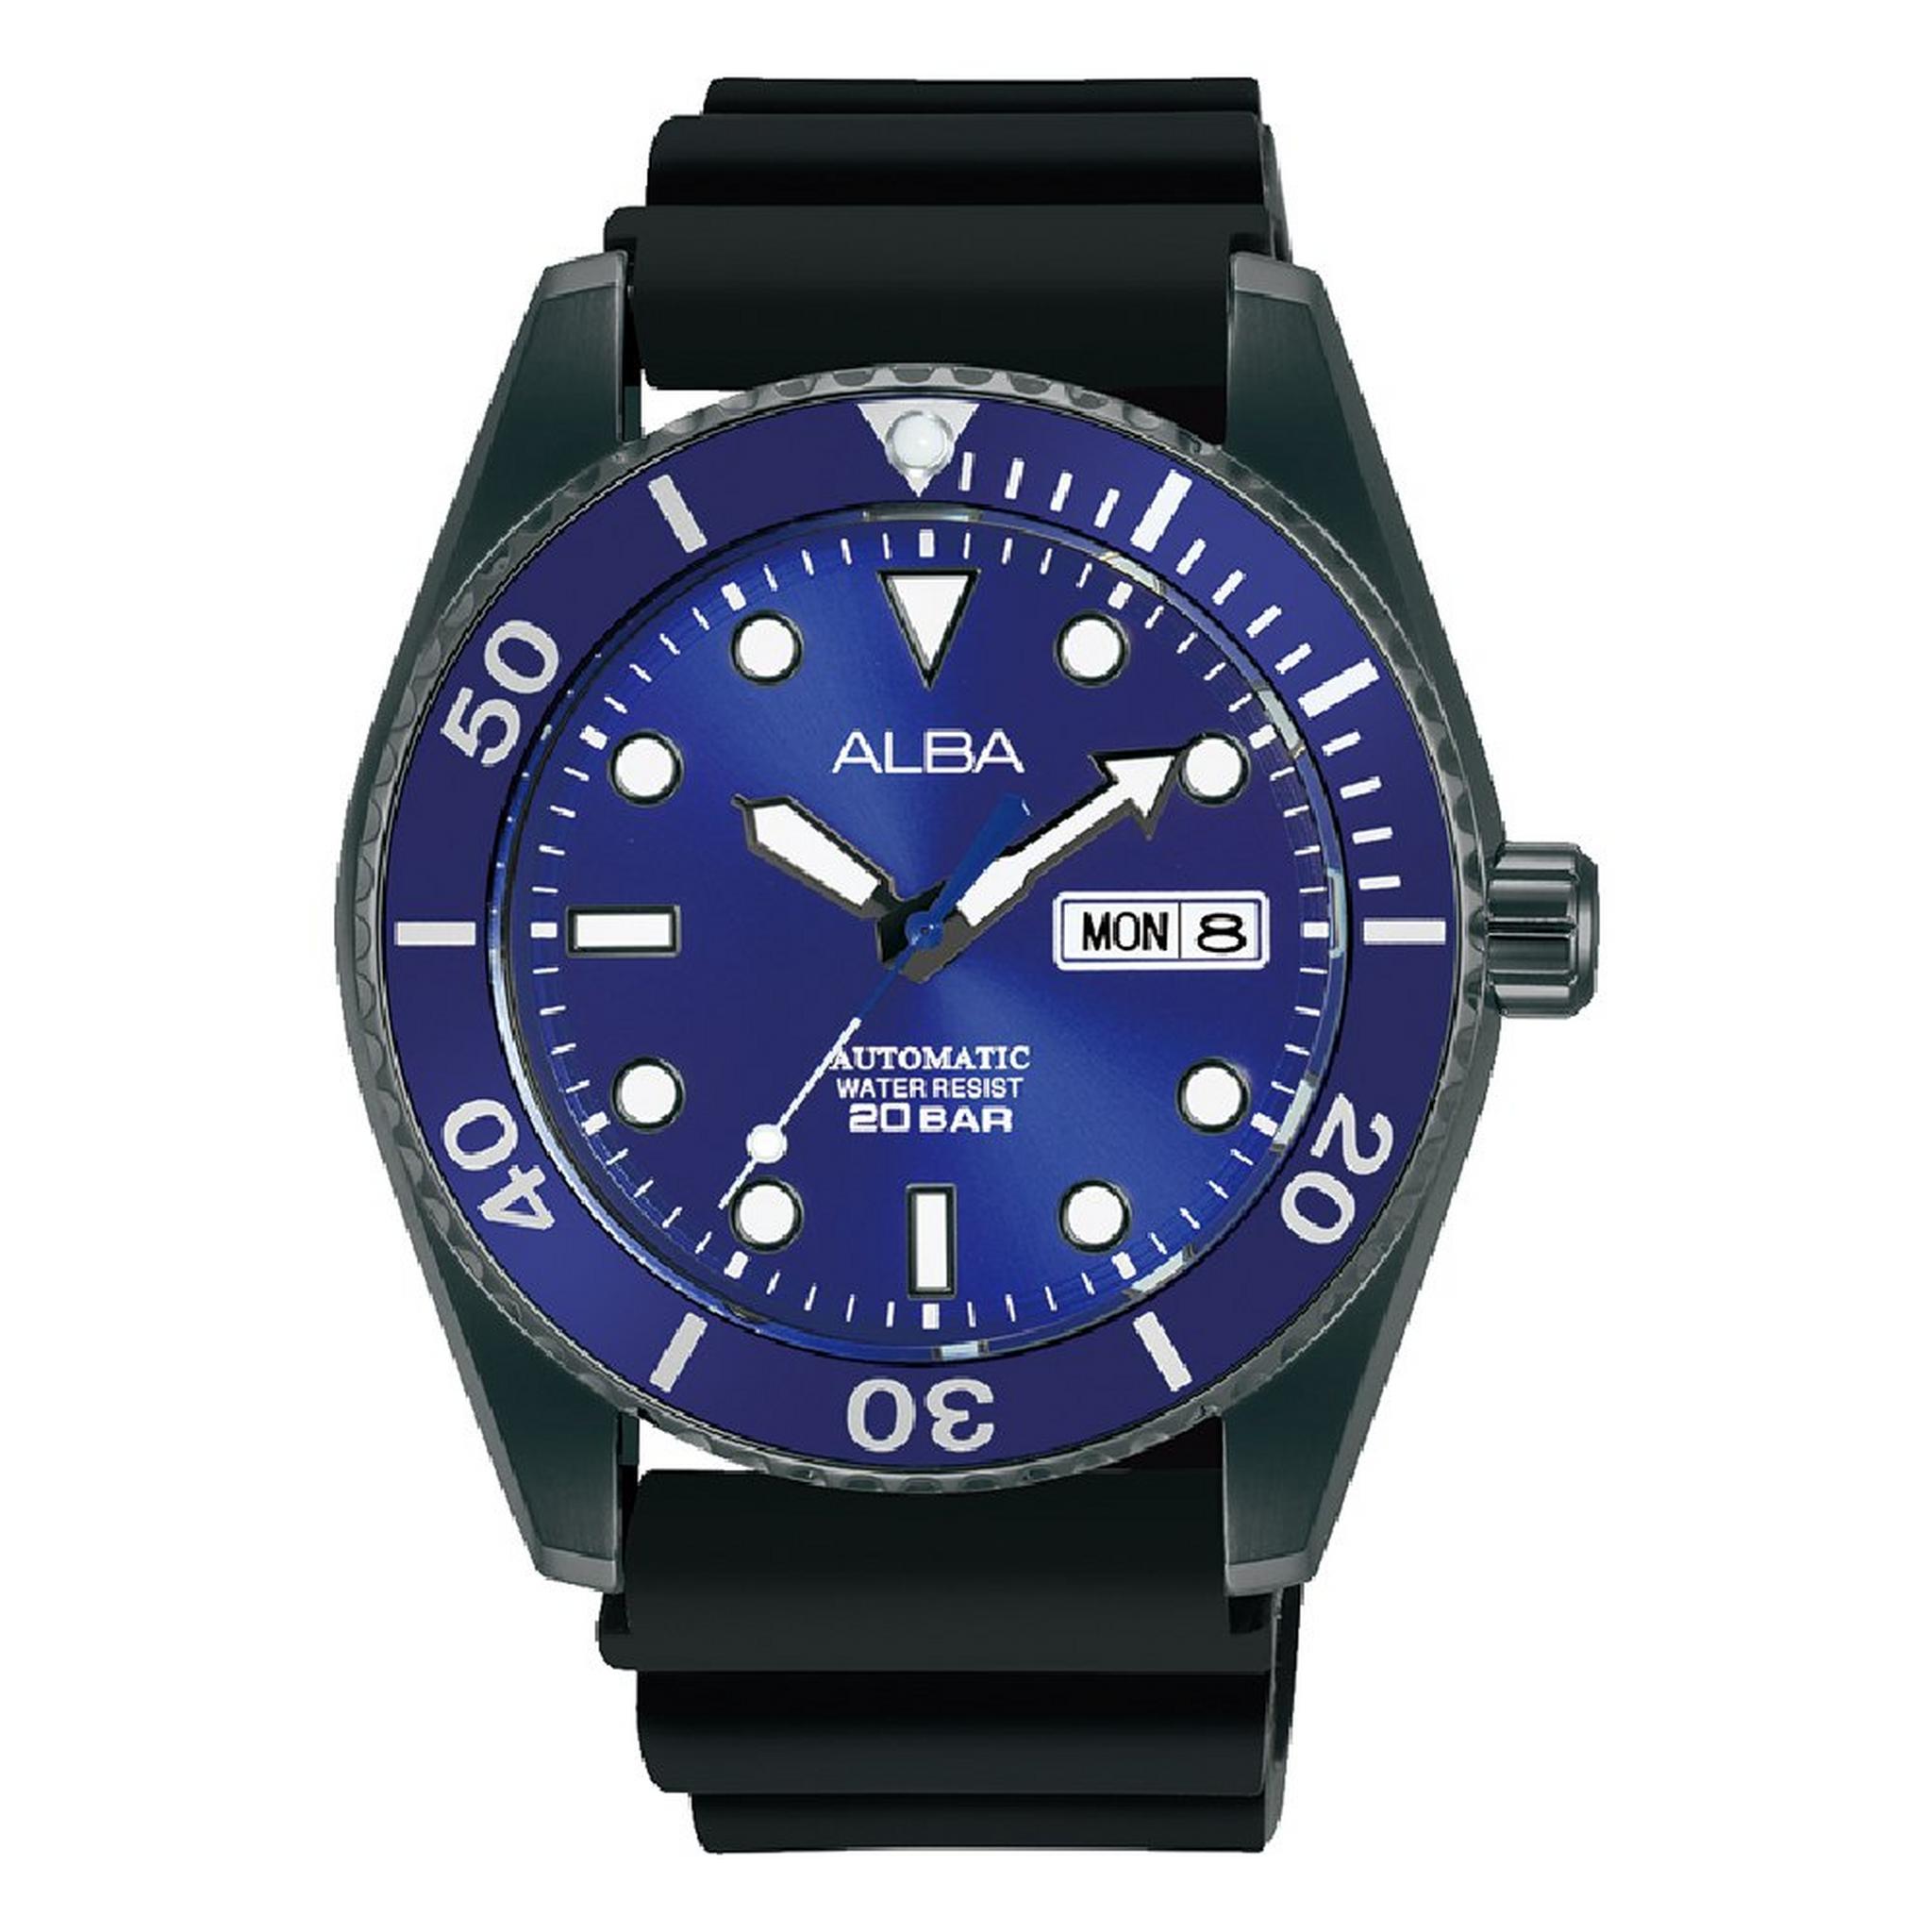 Alba Active Analog 43mm Gent's Rubber Strap Casual Watch - AL4361X1